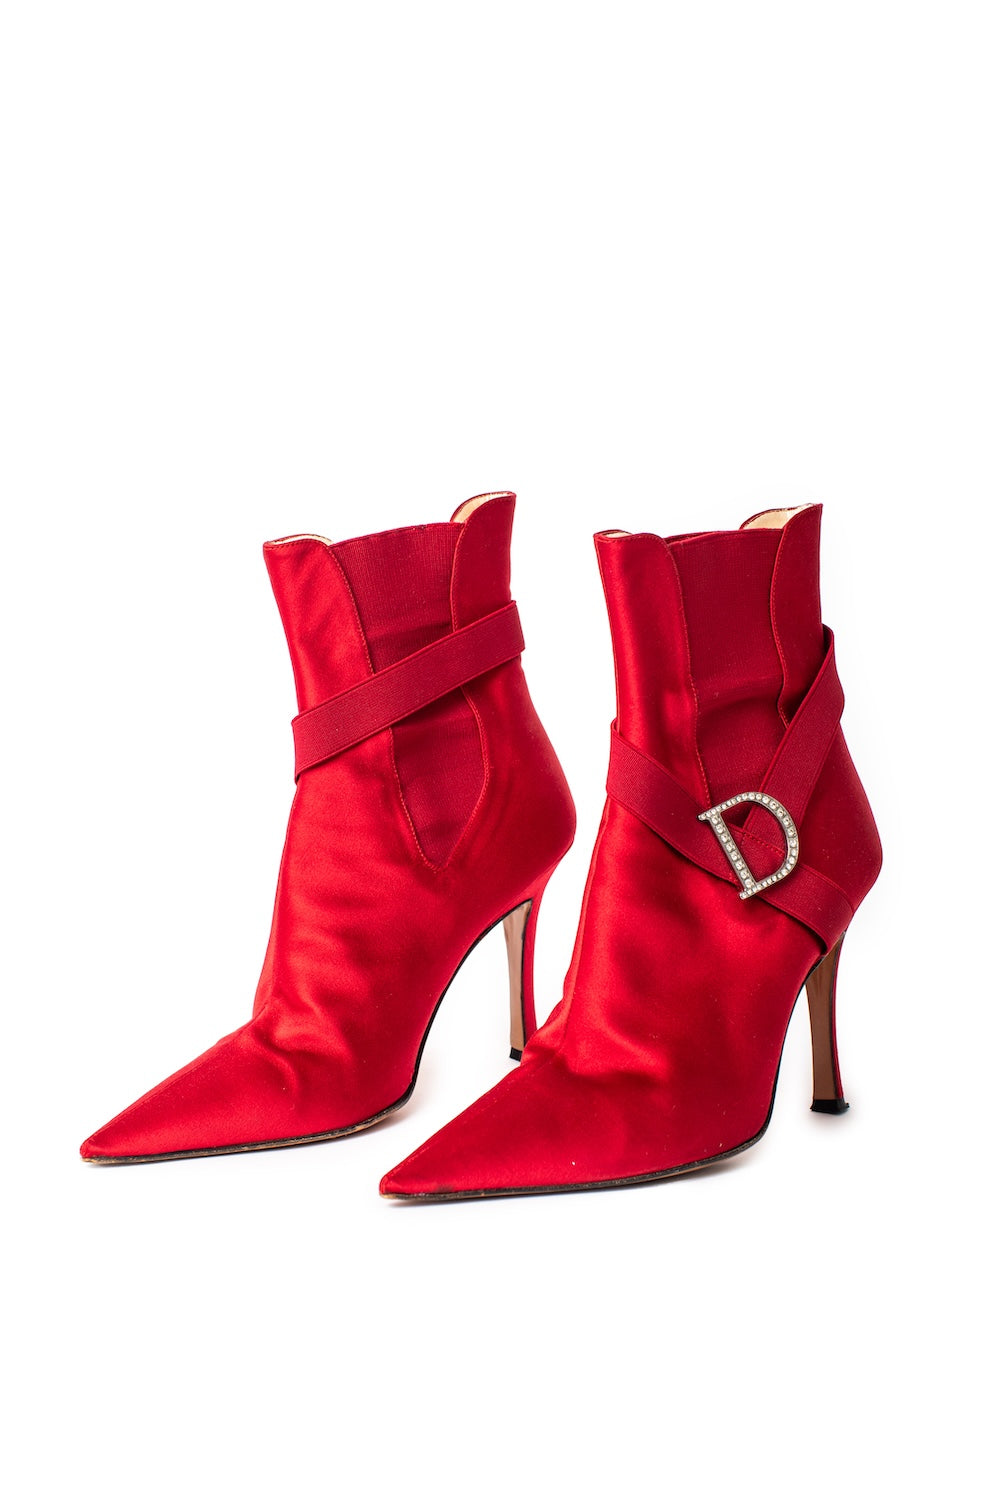 Christian Dior <br> c2003 John Galliano red satin boots with crystal logos